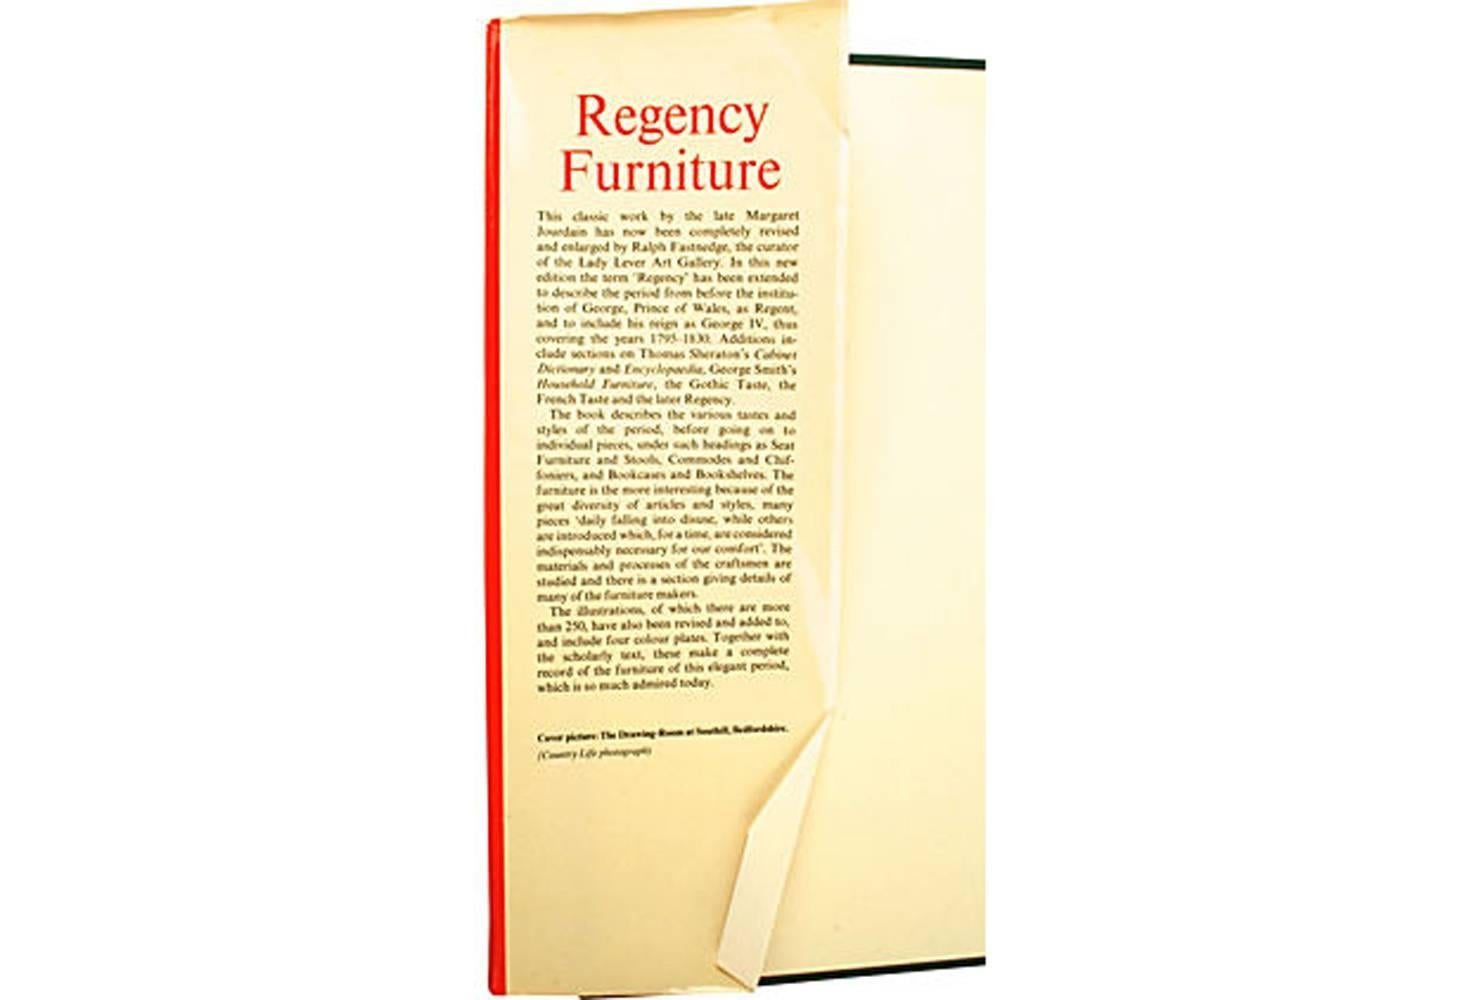 Regency furniture 1795-1820 by Margaret Jourdain. London: Country Life, 1965. First edition, thus, new format and updates by R. Fastnedge. 116 pp. Includes: Greek Revival; Thomas Hope; Thomas Sheraton's; Egyptian Revival; Chinese, Greek, French and